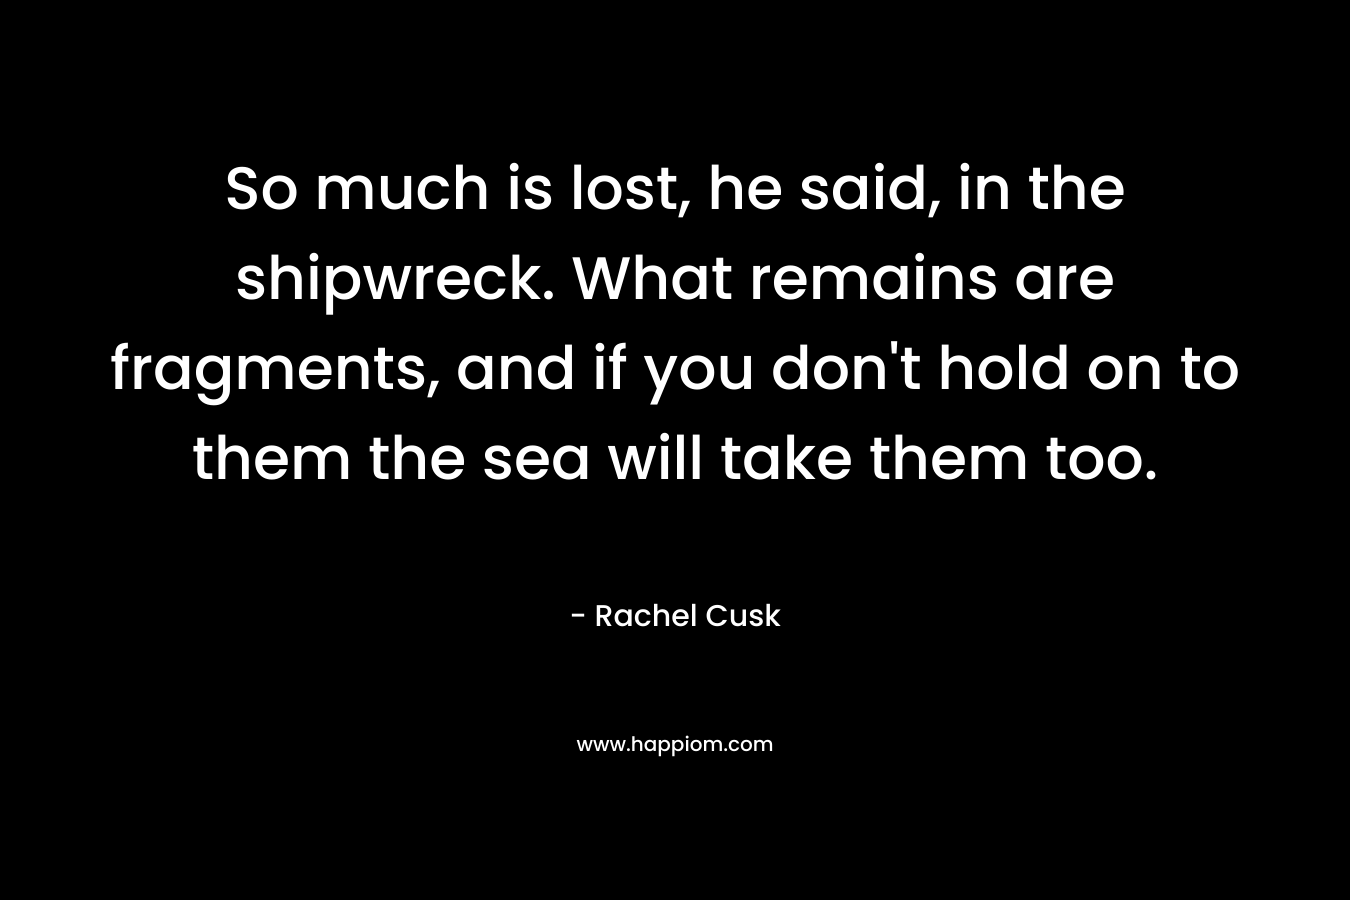 So much is lost, he said, in the shipwreck. What remains are fragments, and if you don't hold on to them the sea will take them too.